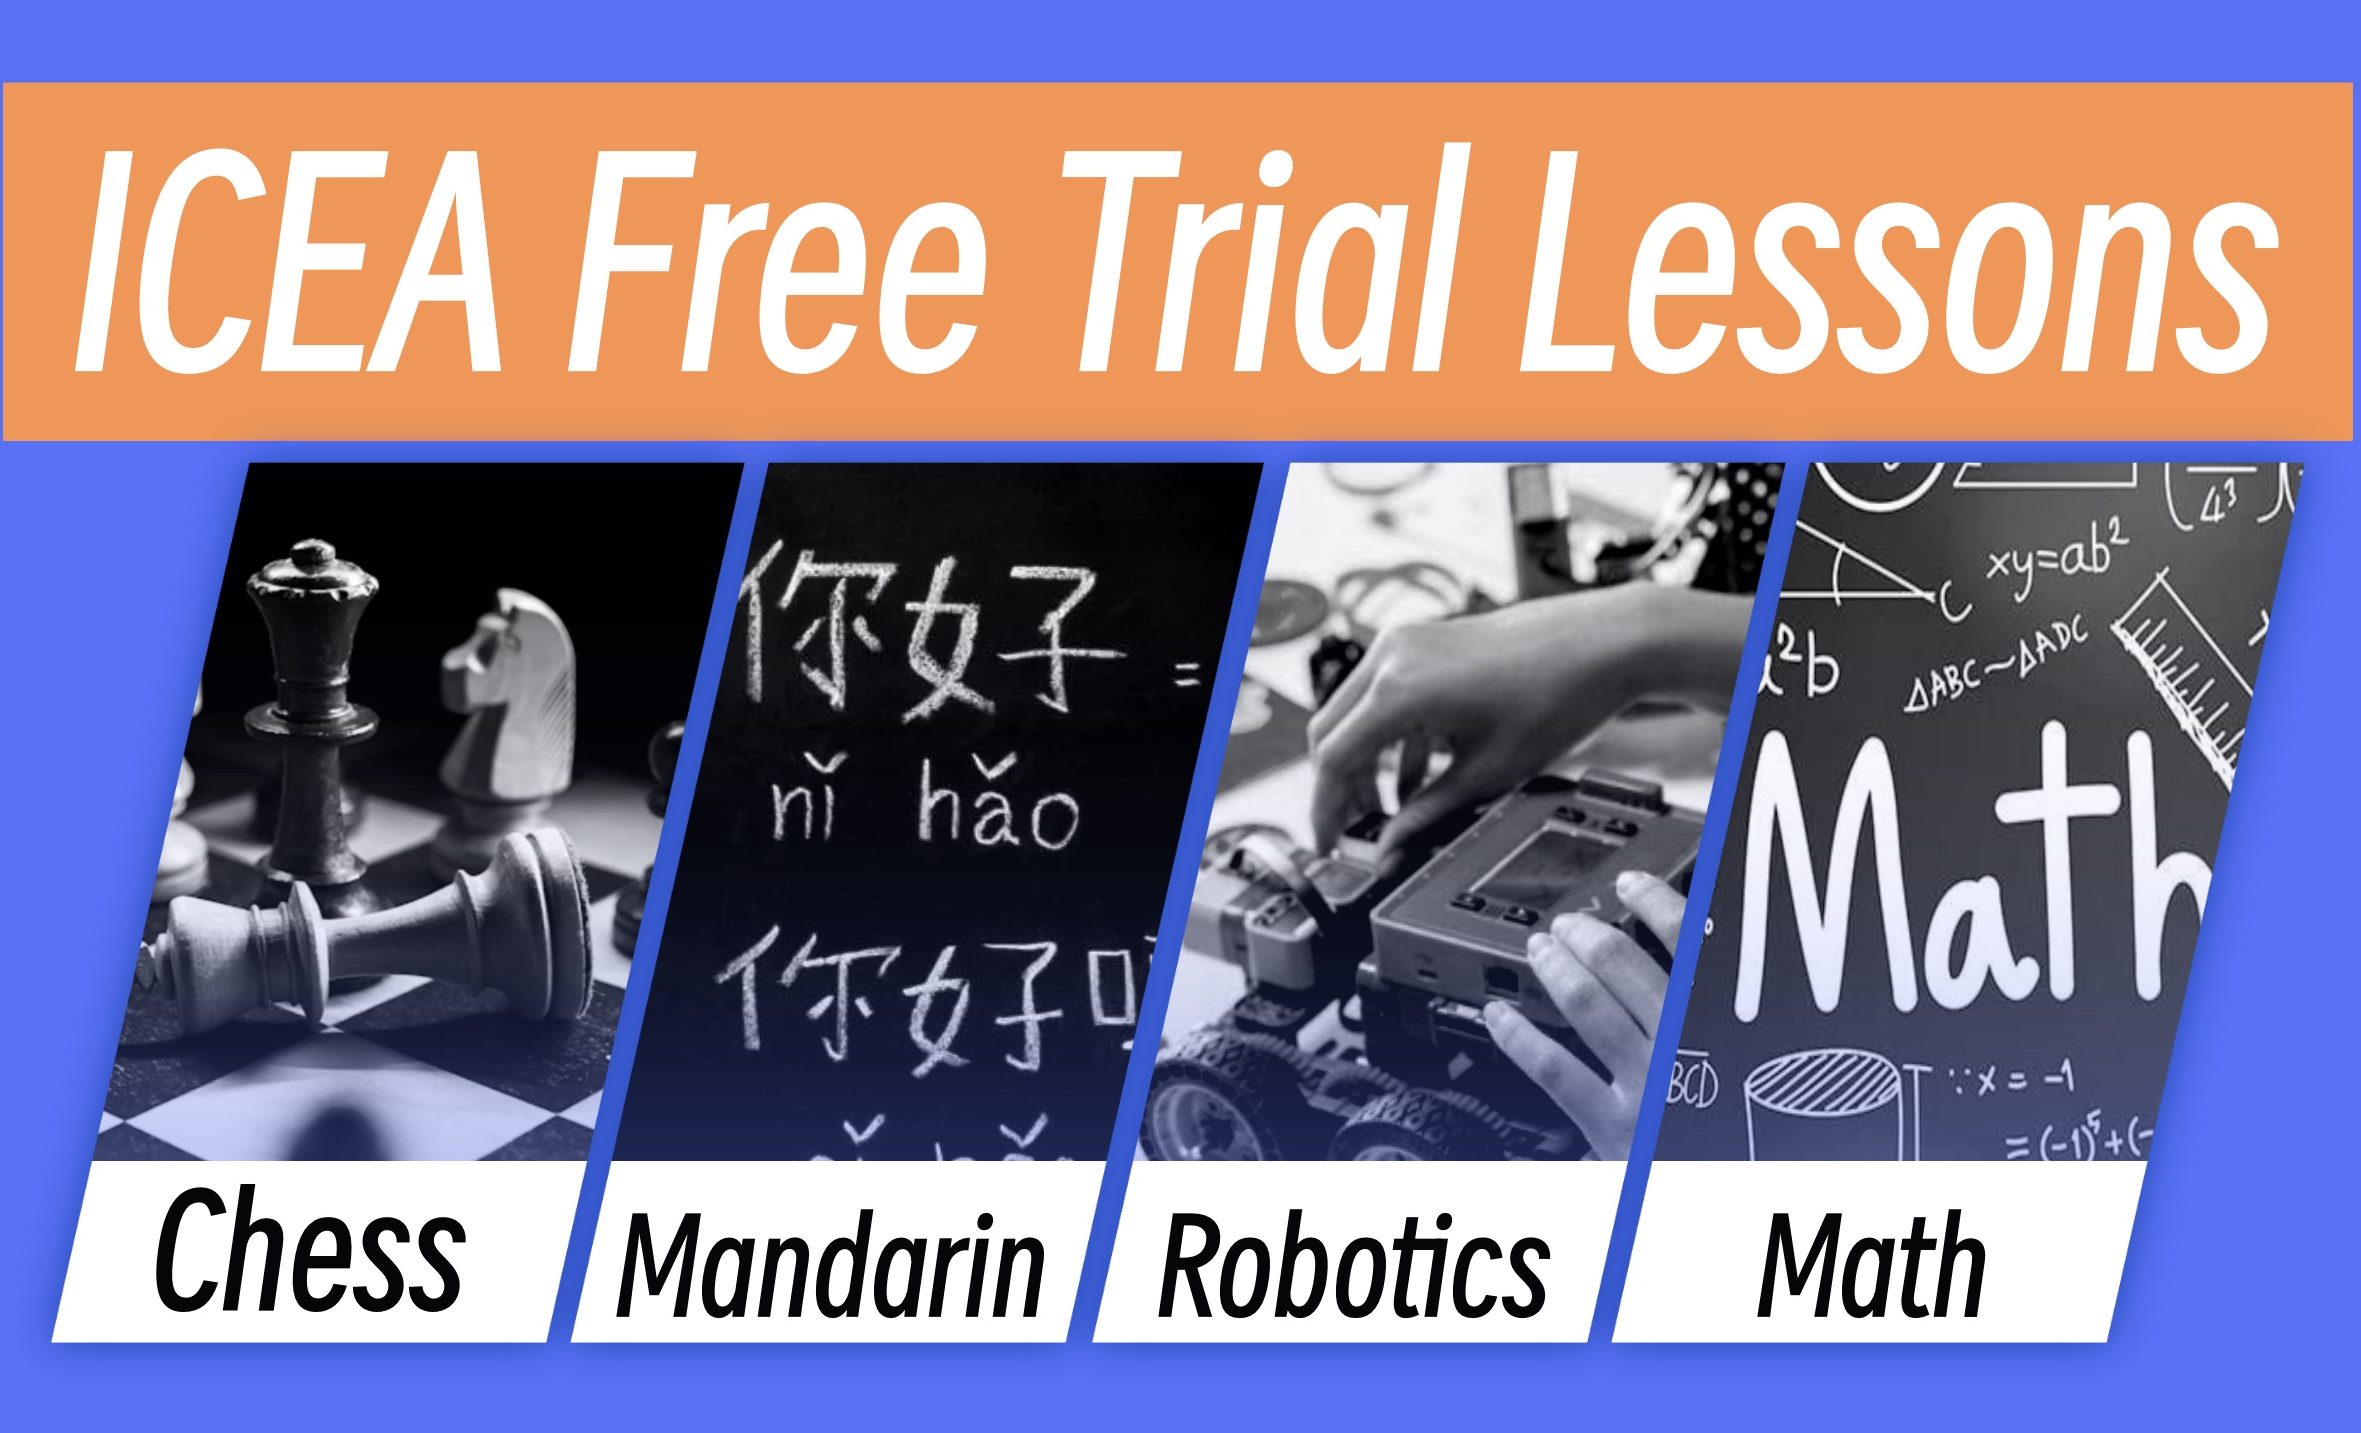 ICEA Free Trial Lessons